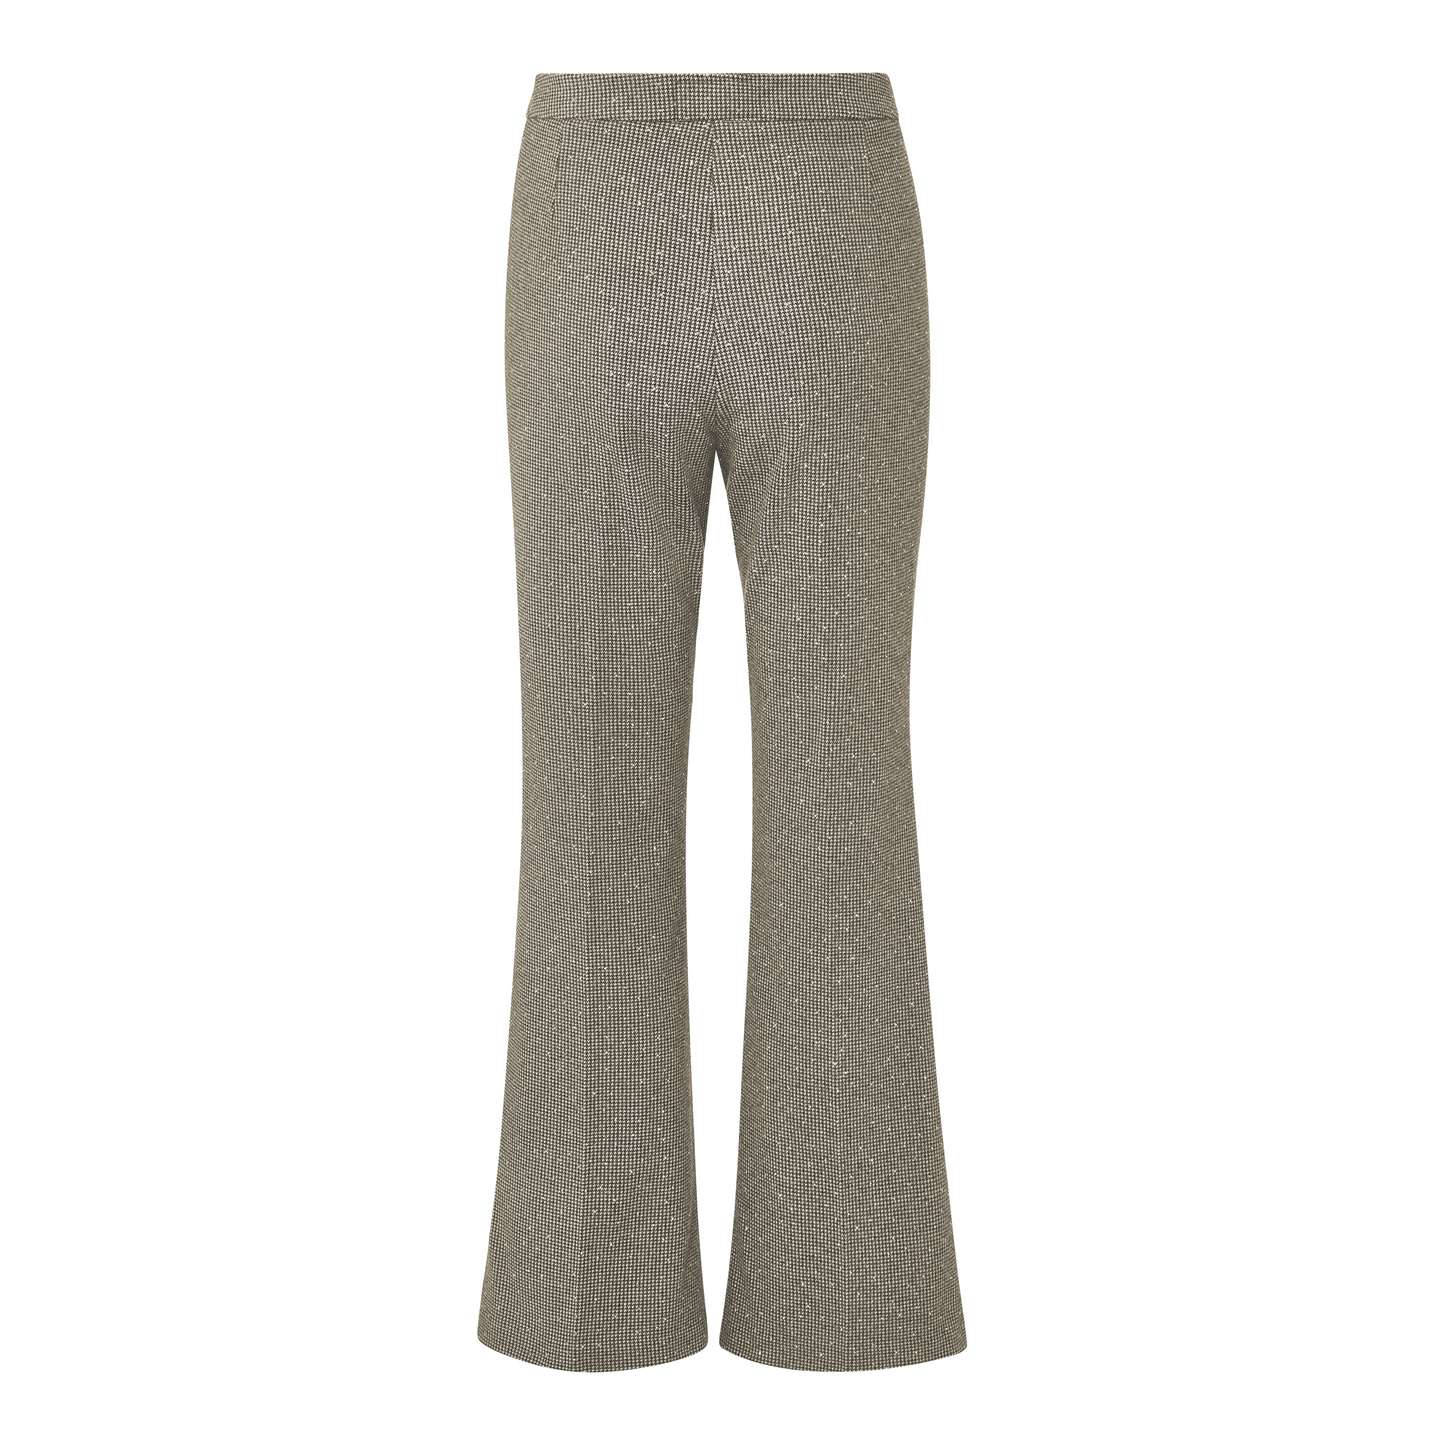 Bossy Flared Pants - Camel Brown